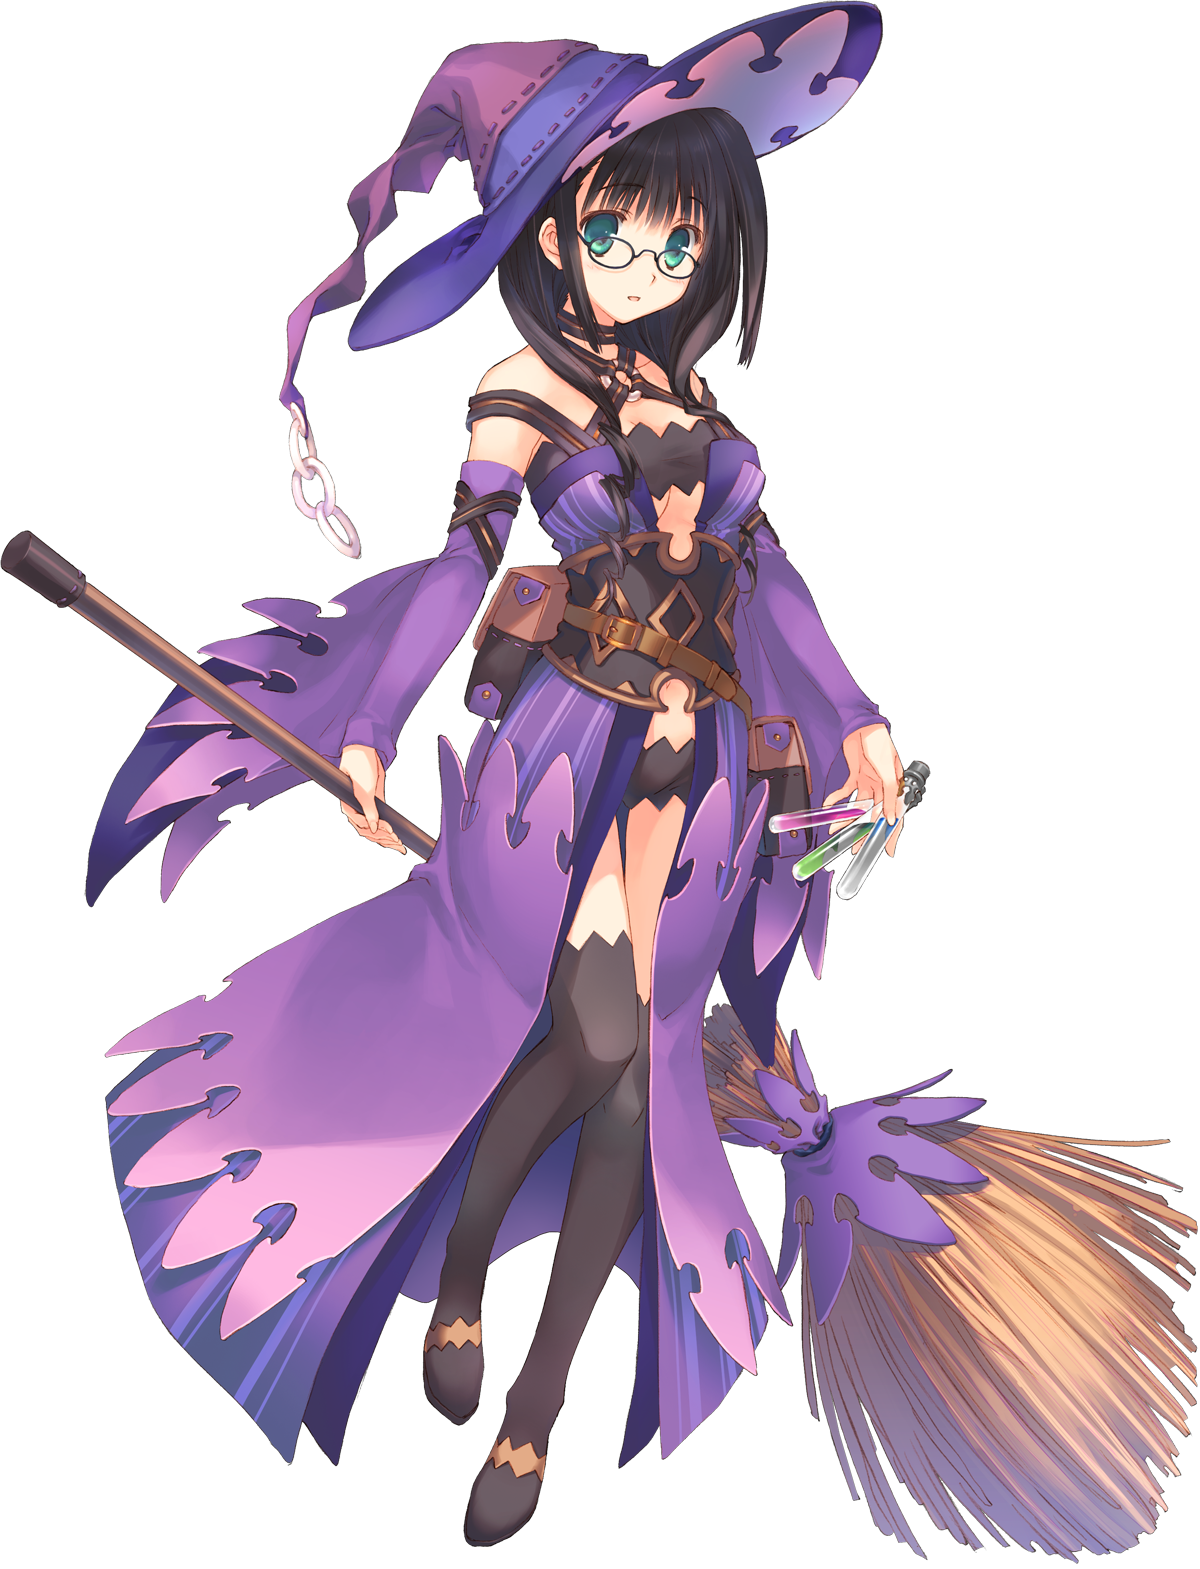 Dungeon Travelers 2 - Melvy de Florencia 5 - Witch